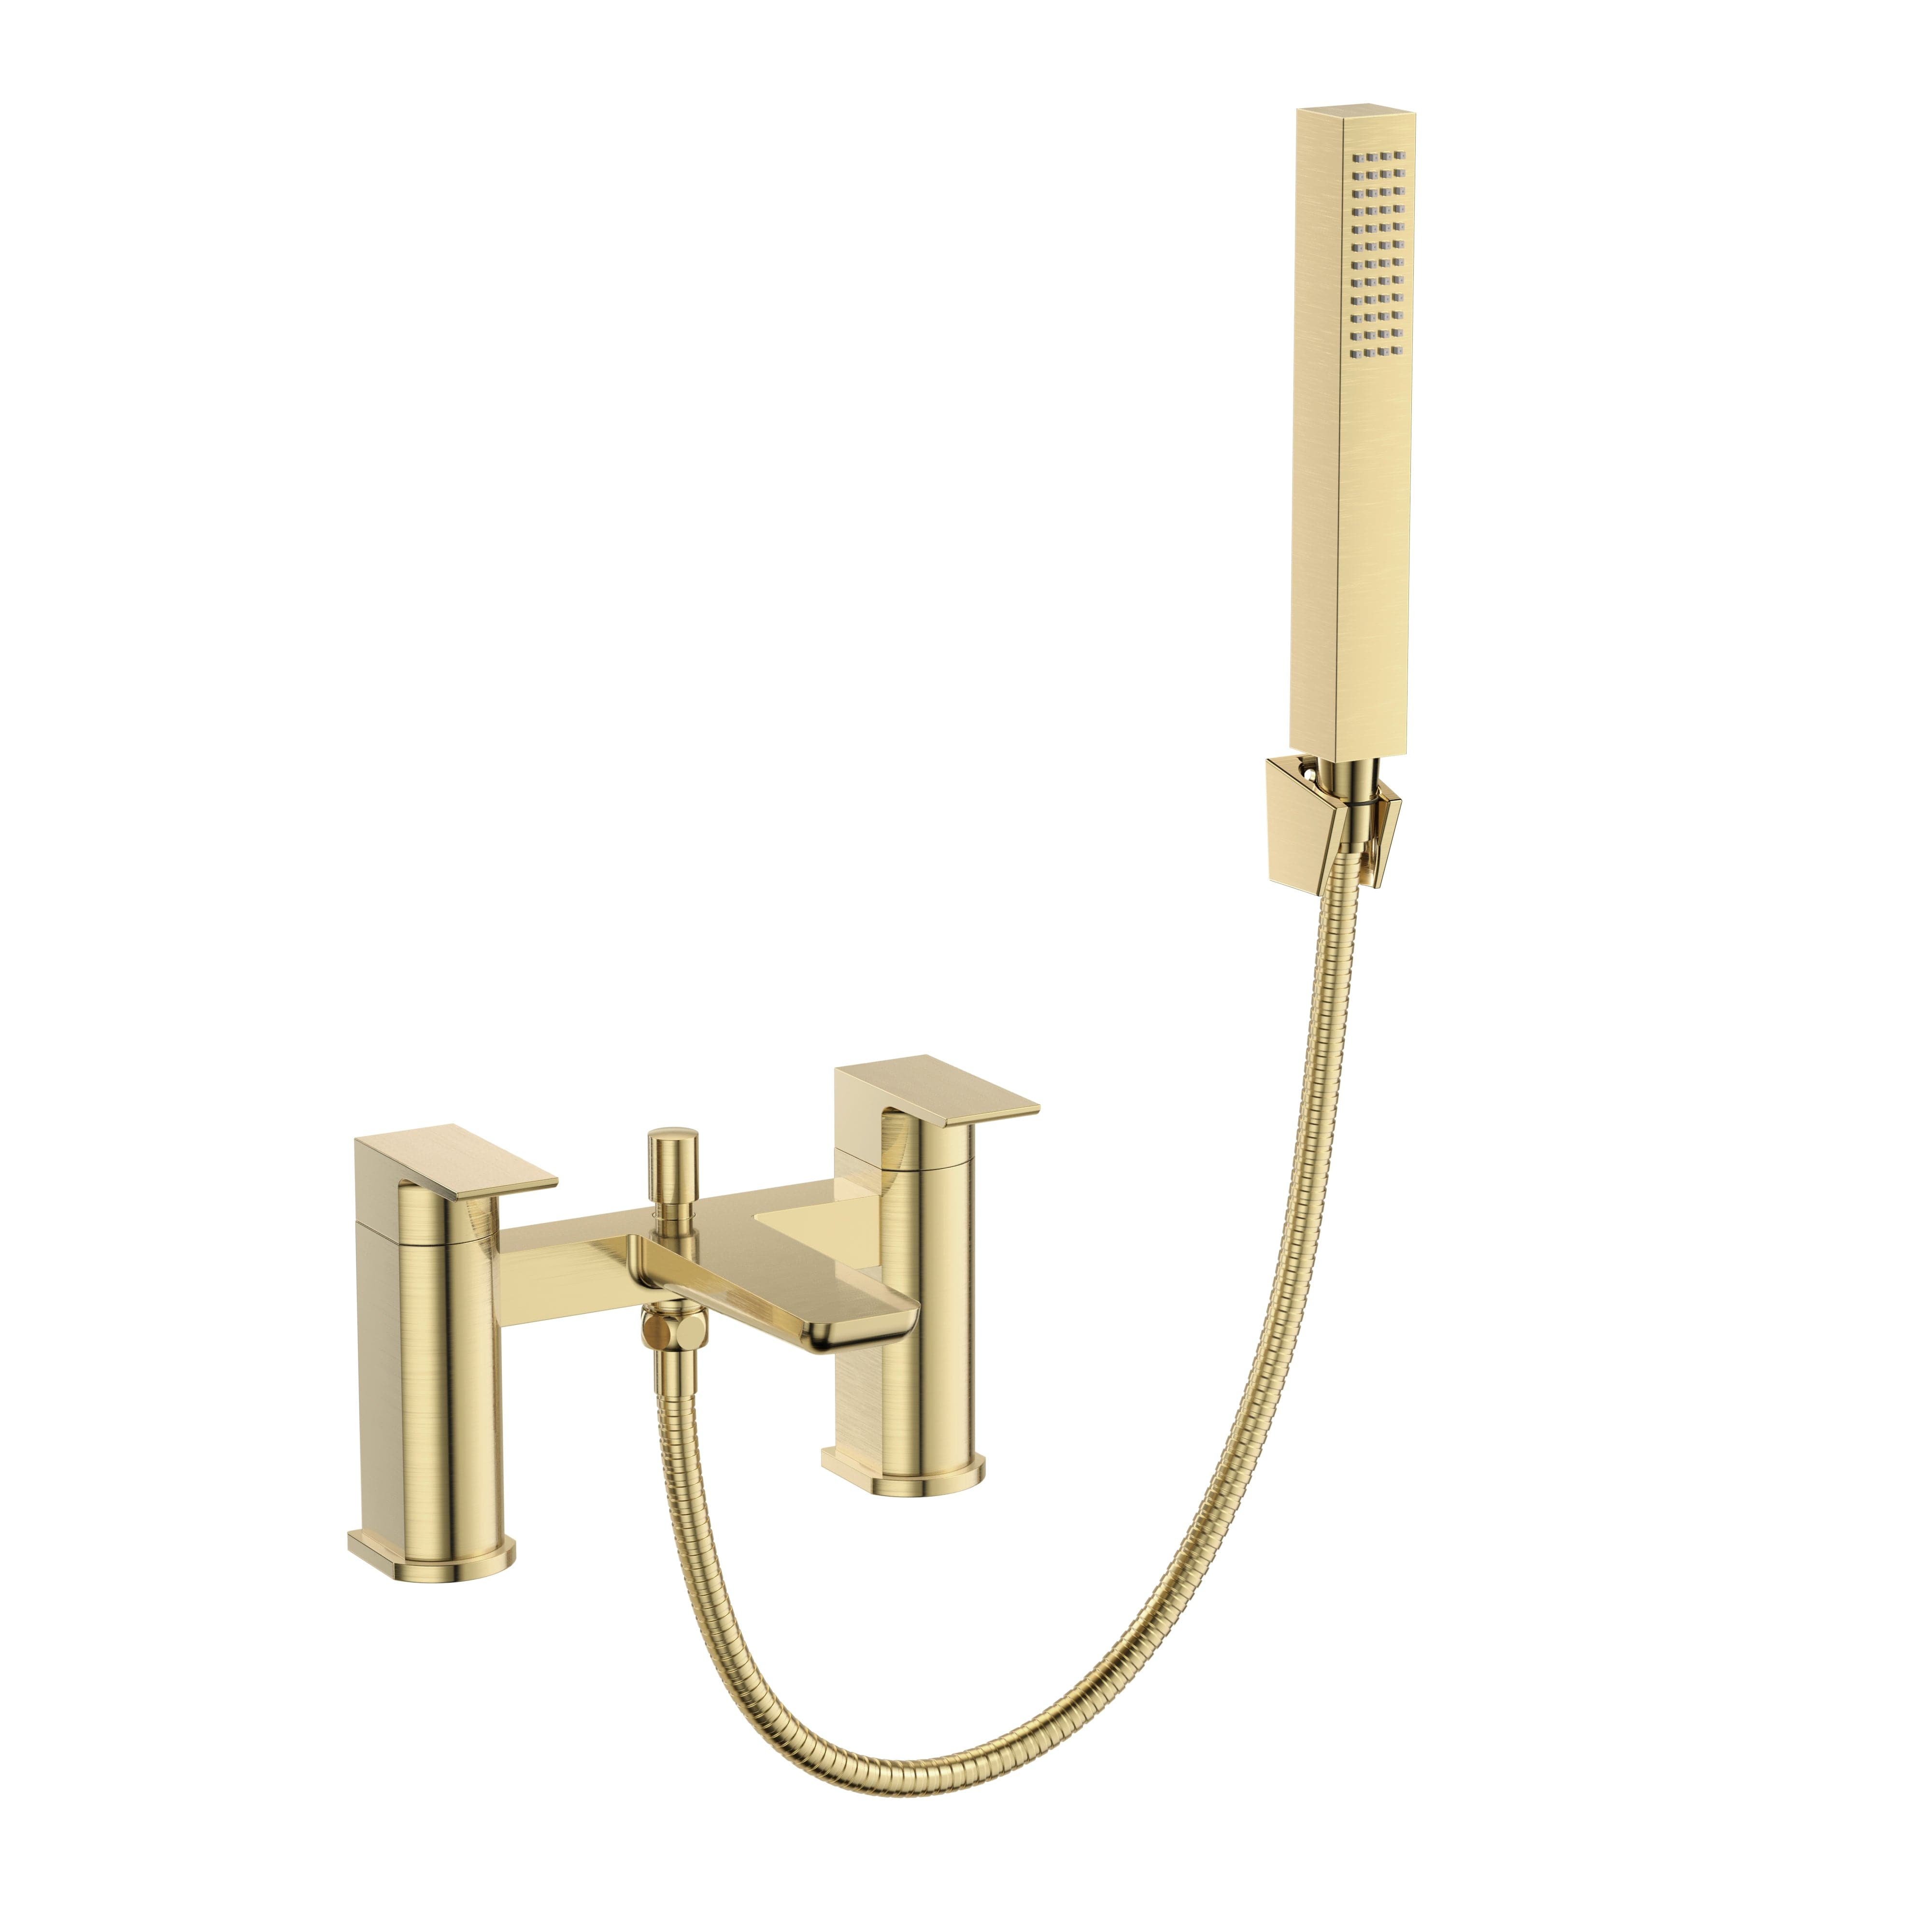 Lunar Soft Square Bath Shower Mixer Tap with Kit - Brushed Brass